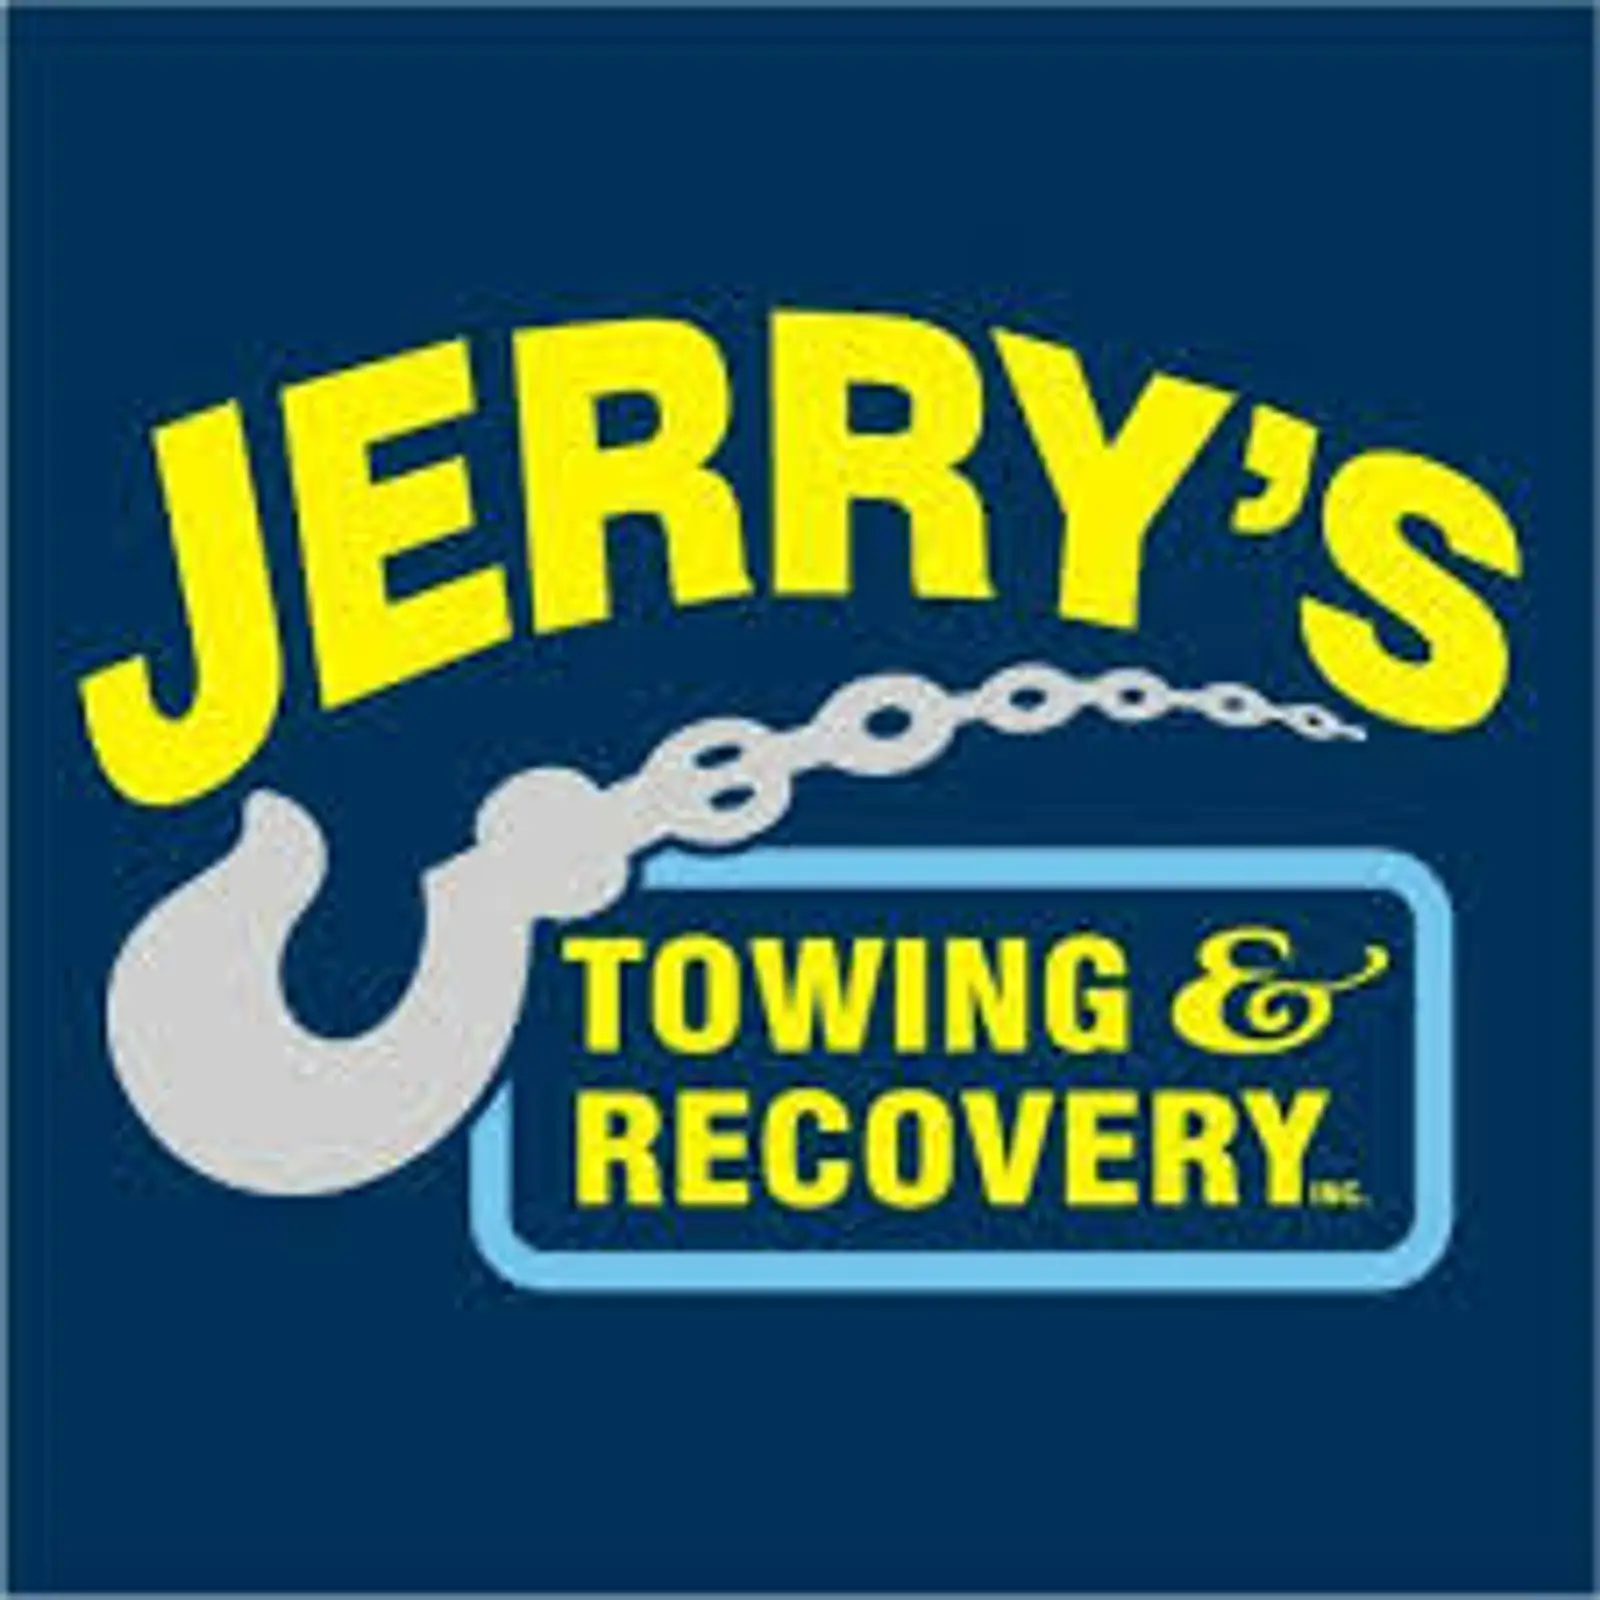 Jerry's Towing & Recovery Inc. logo